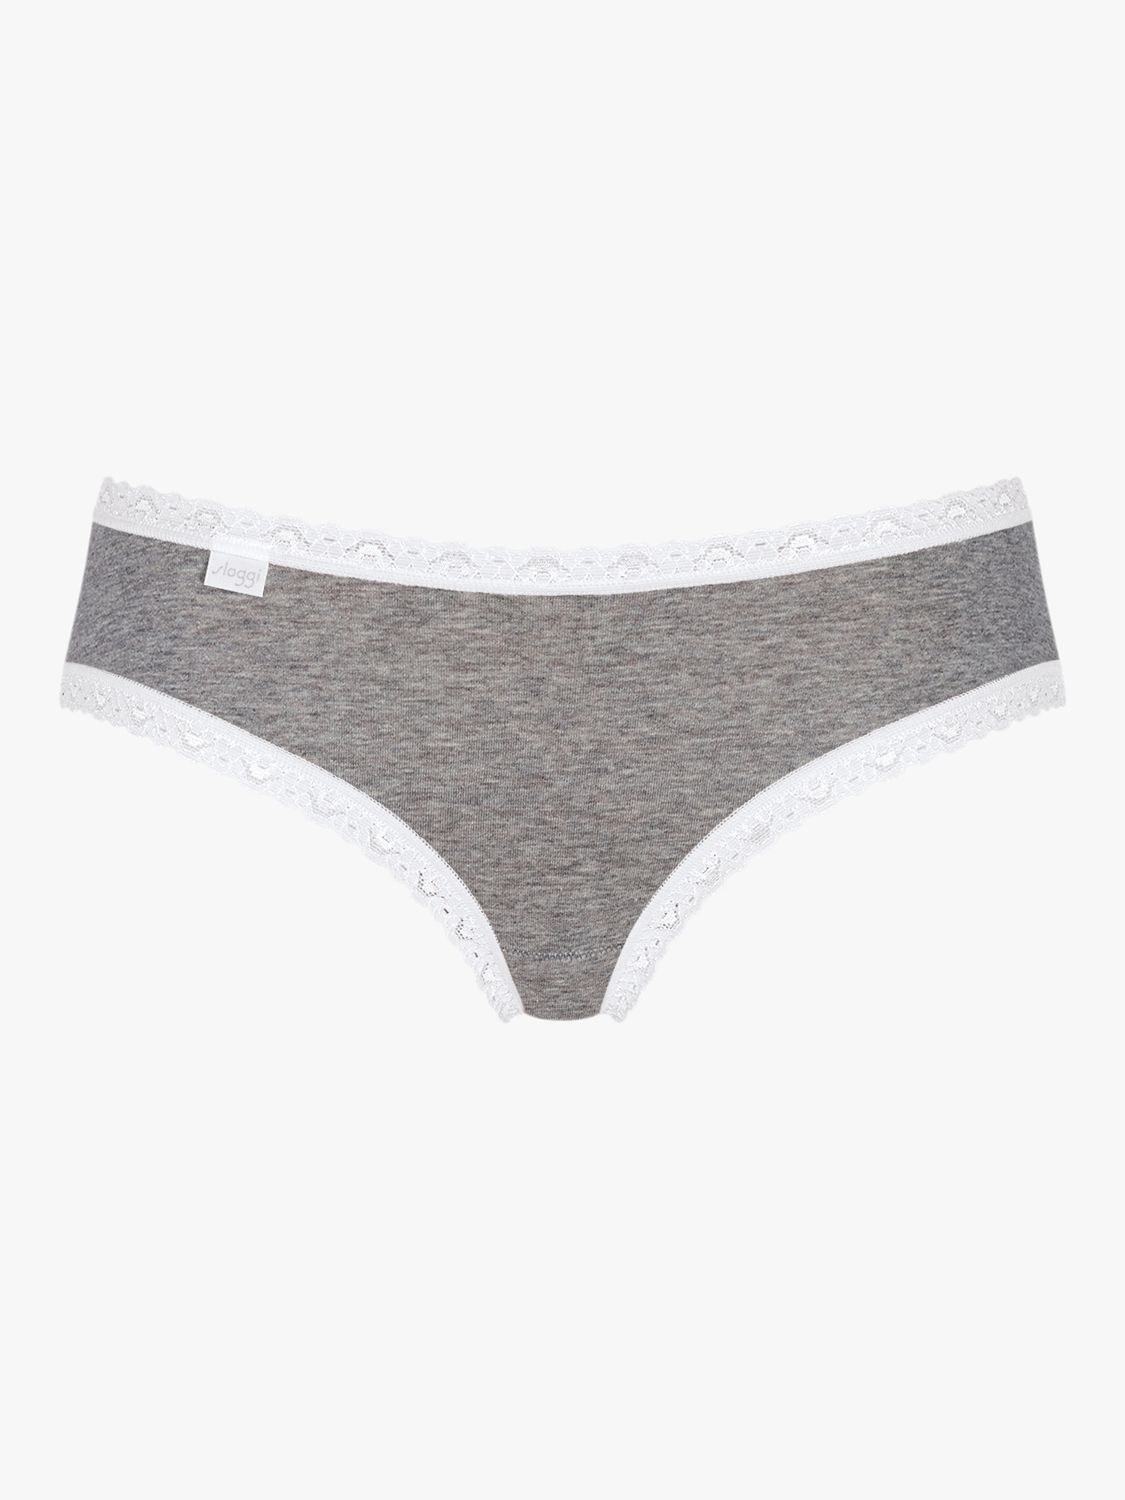 sloggi 24/7 Weekend Hipster Knickers, Pack of 3, White - Light